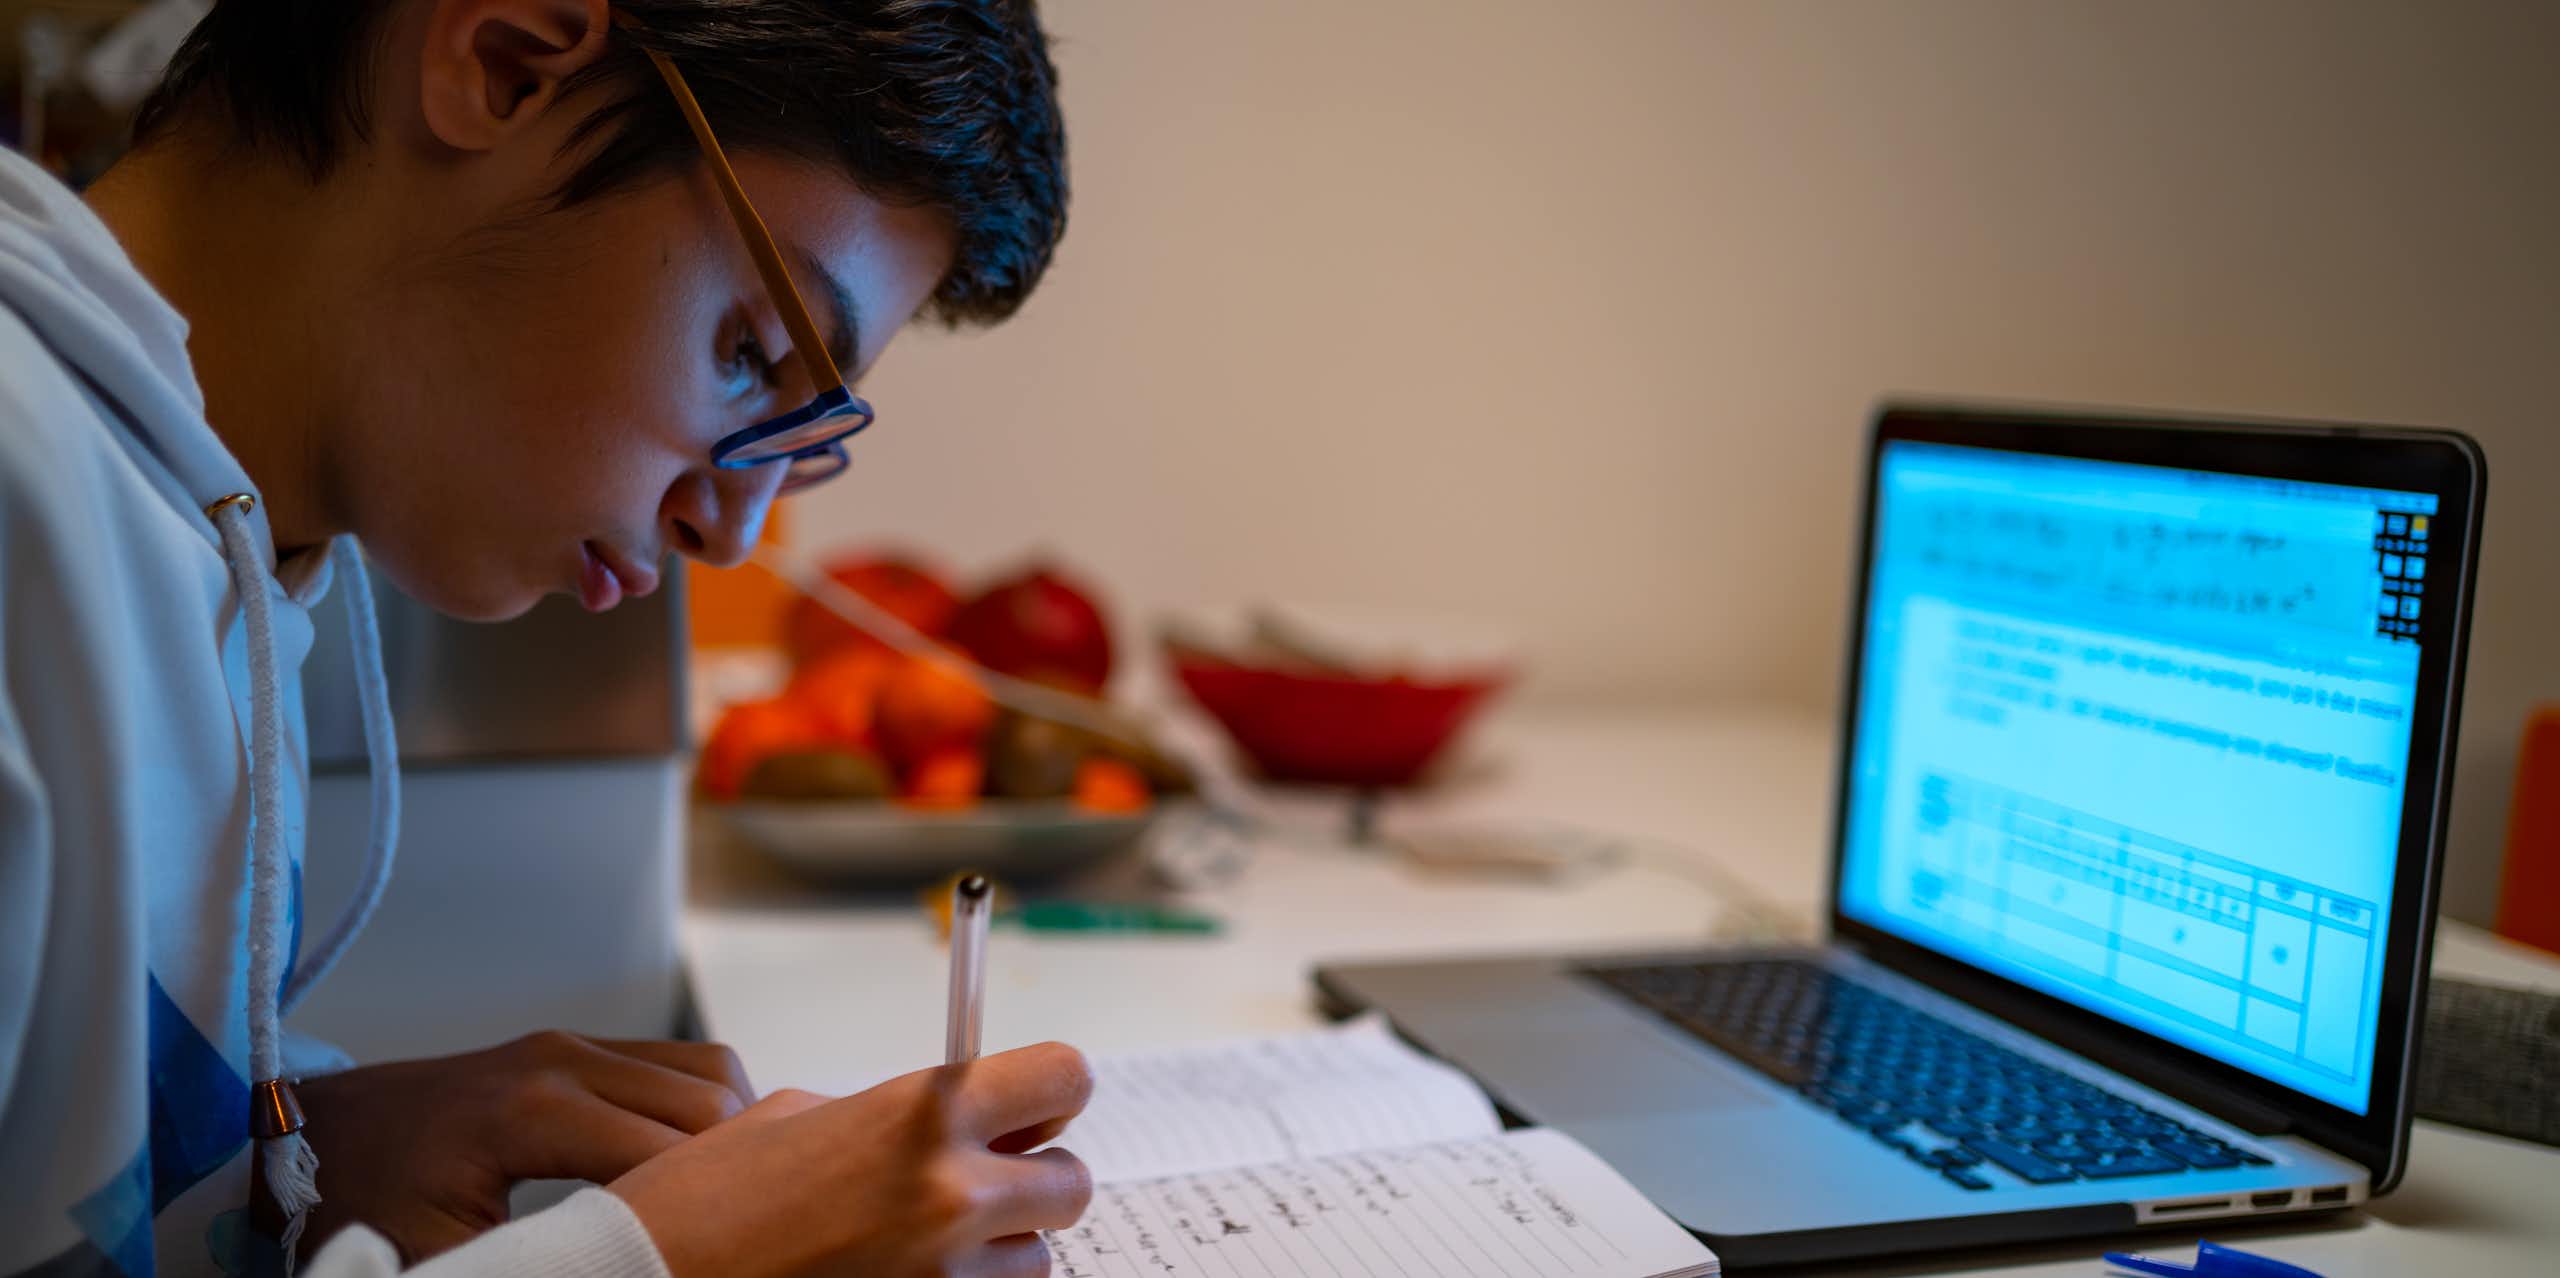 Teen boy studying taking notes from laptop